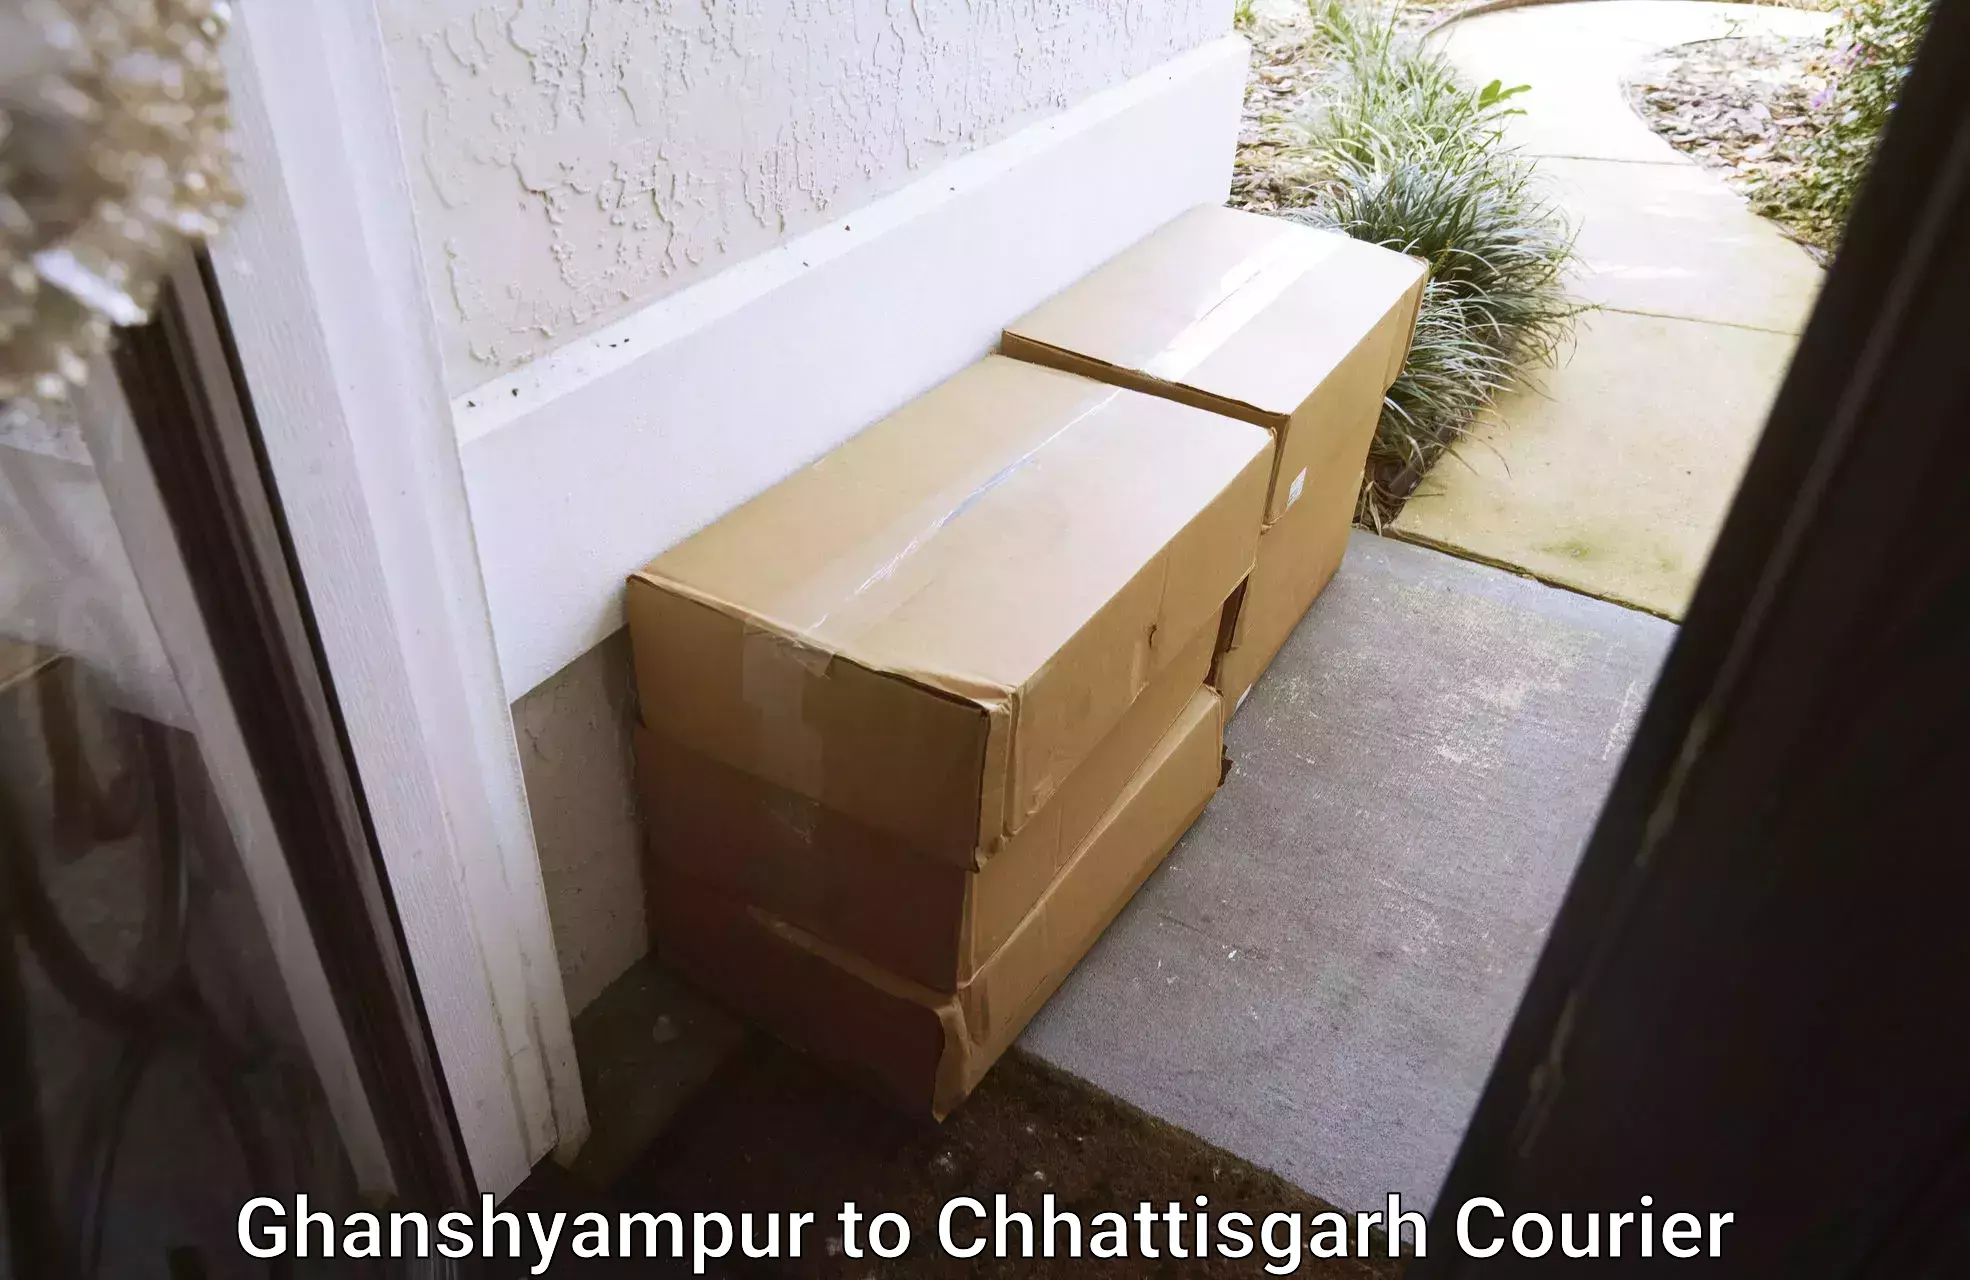 Home goods moving company Ghanshyampur to Ramanujganj